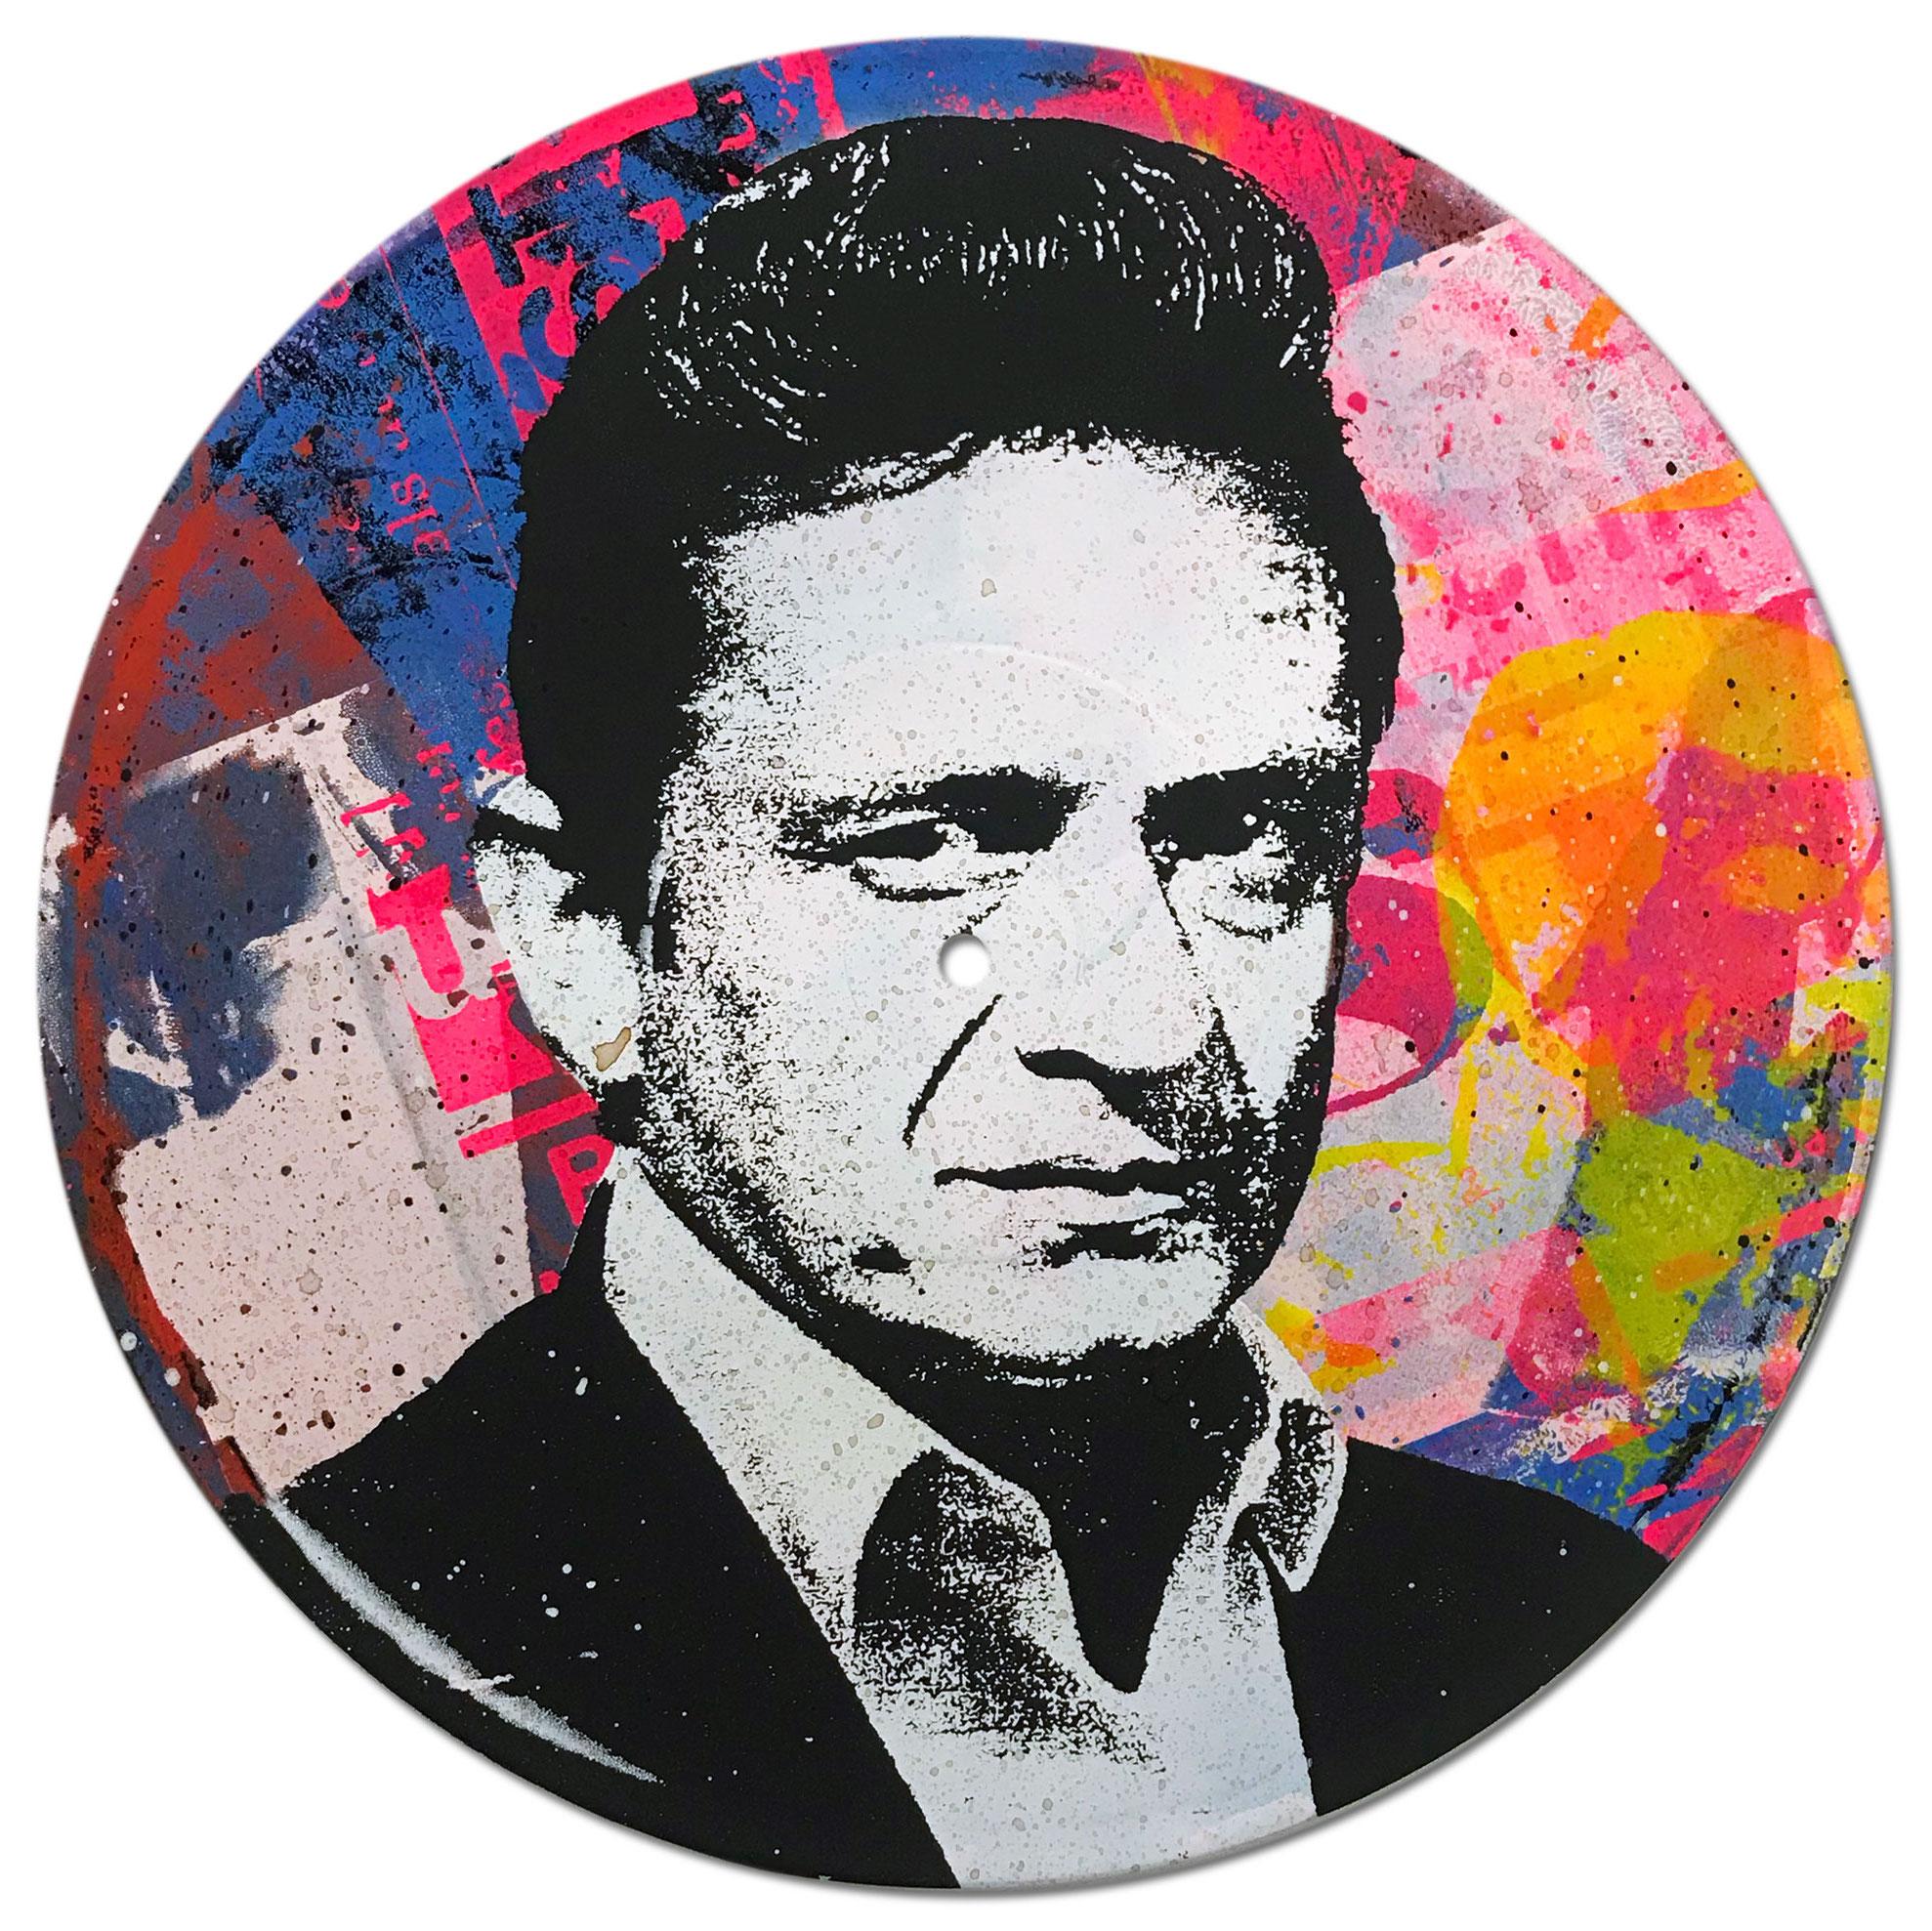 Johnny Cash Vinyl 1-10 Greg Gossel Pop Art LP Record (Singles & Sets Available)

Editions Available: 1,2,3,5,68,9,10

These vinyl LP's were created for Greg Gossel's show 